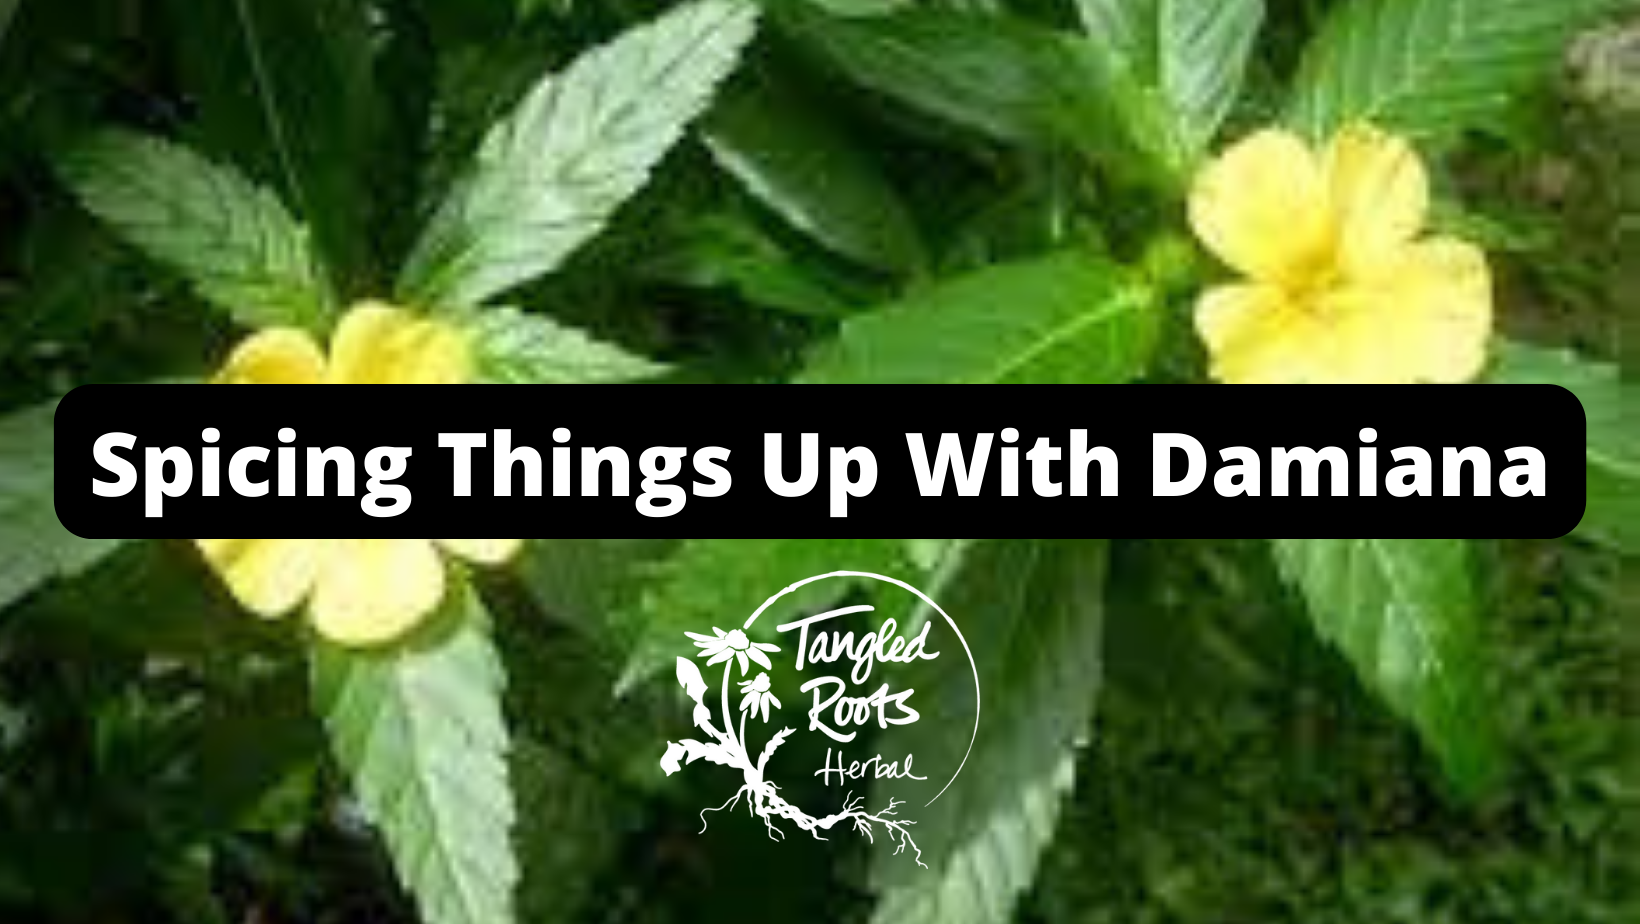 Spicing Things Up With Damiana